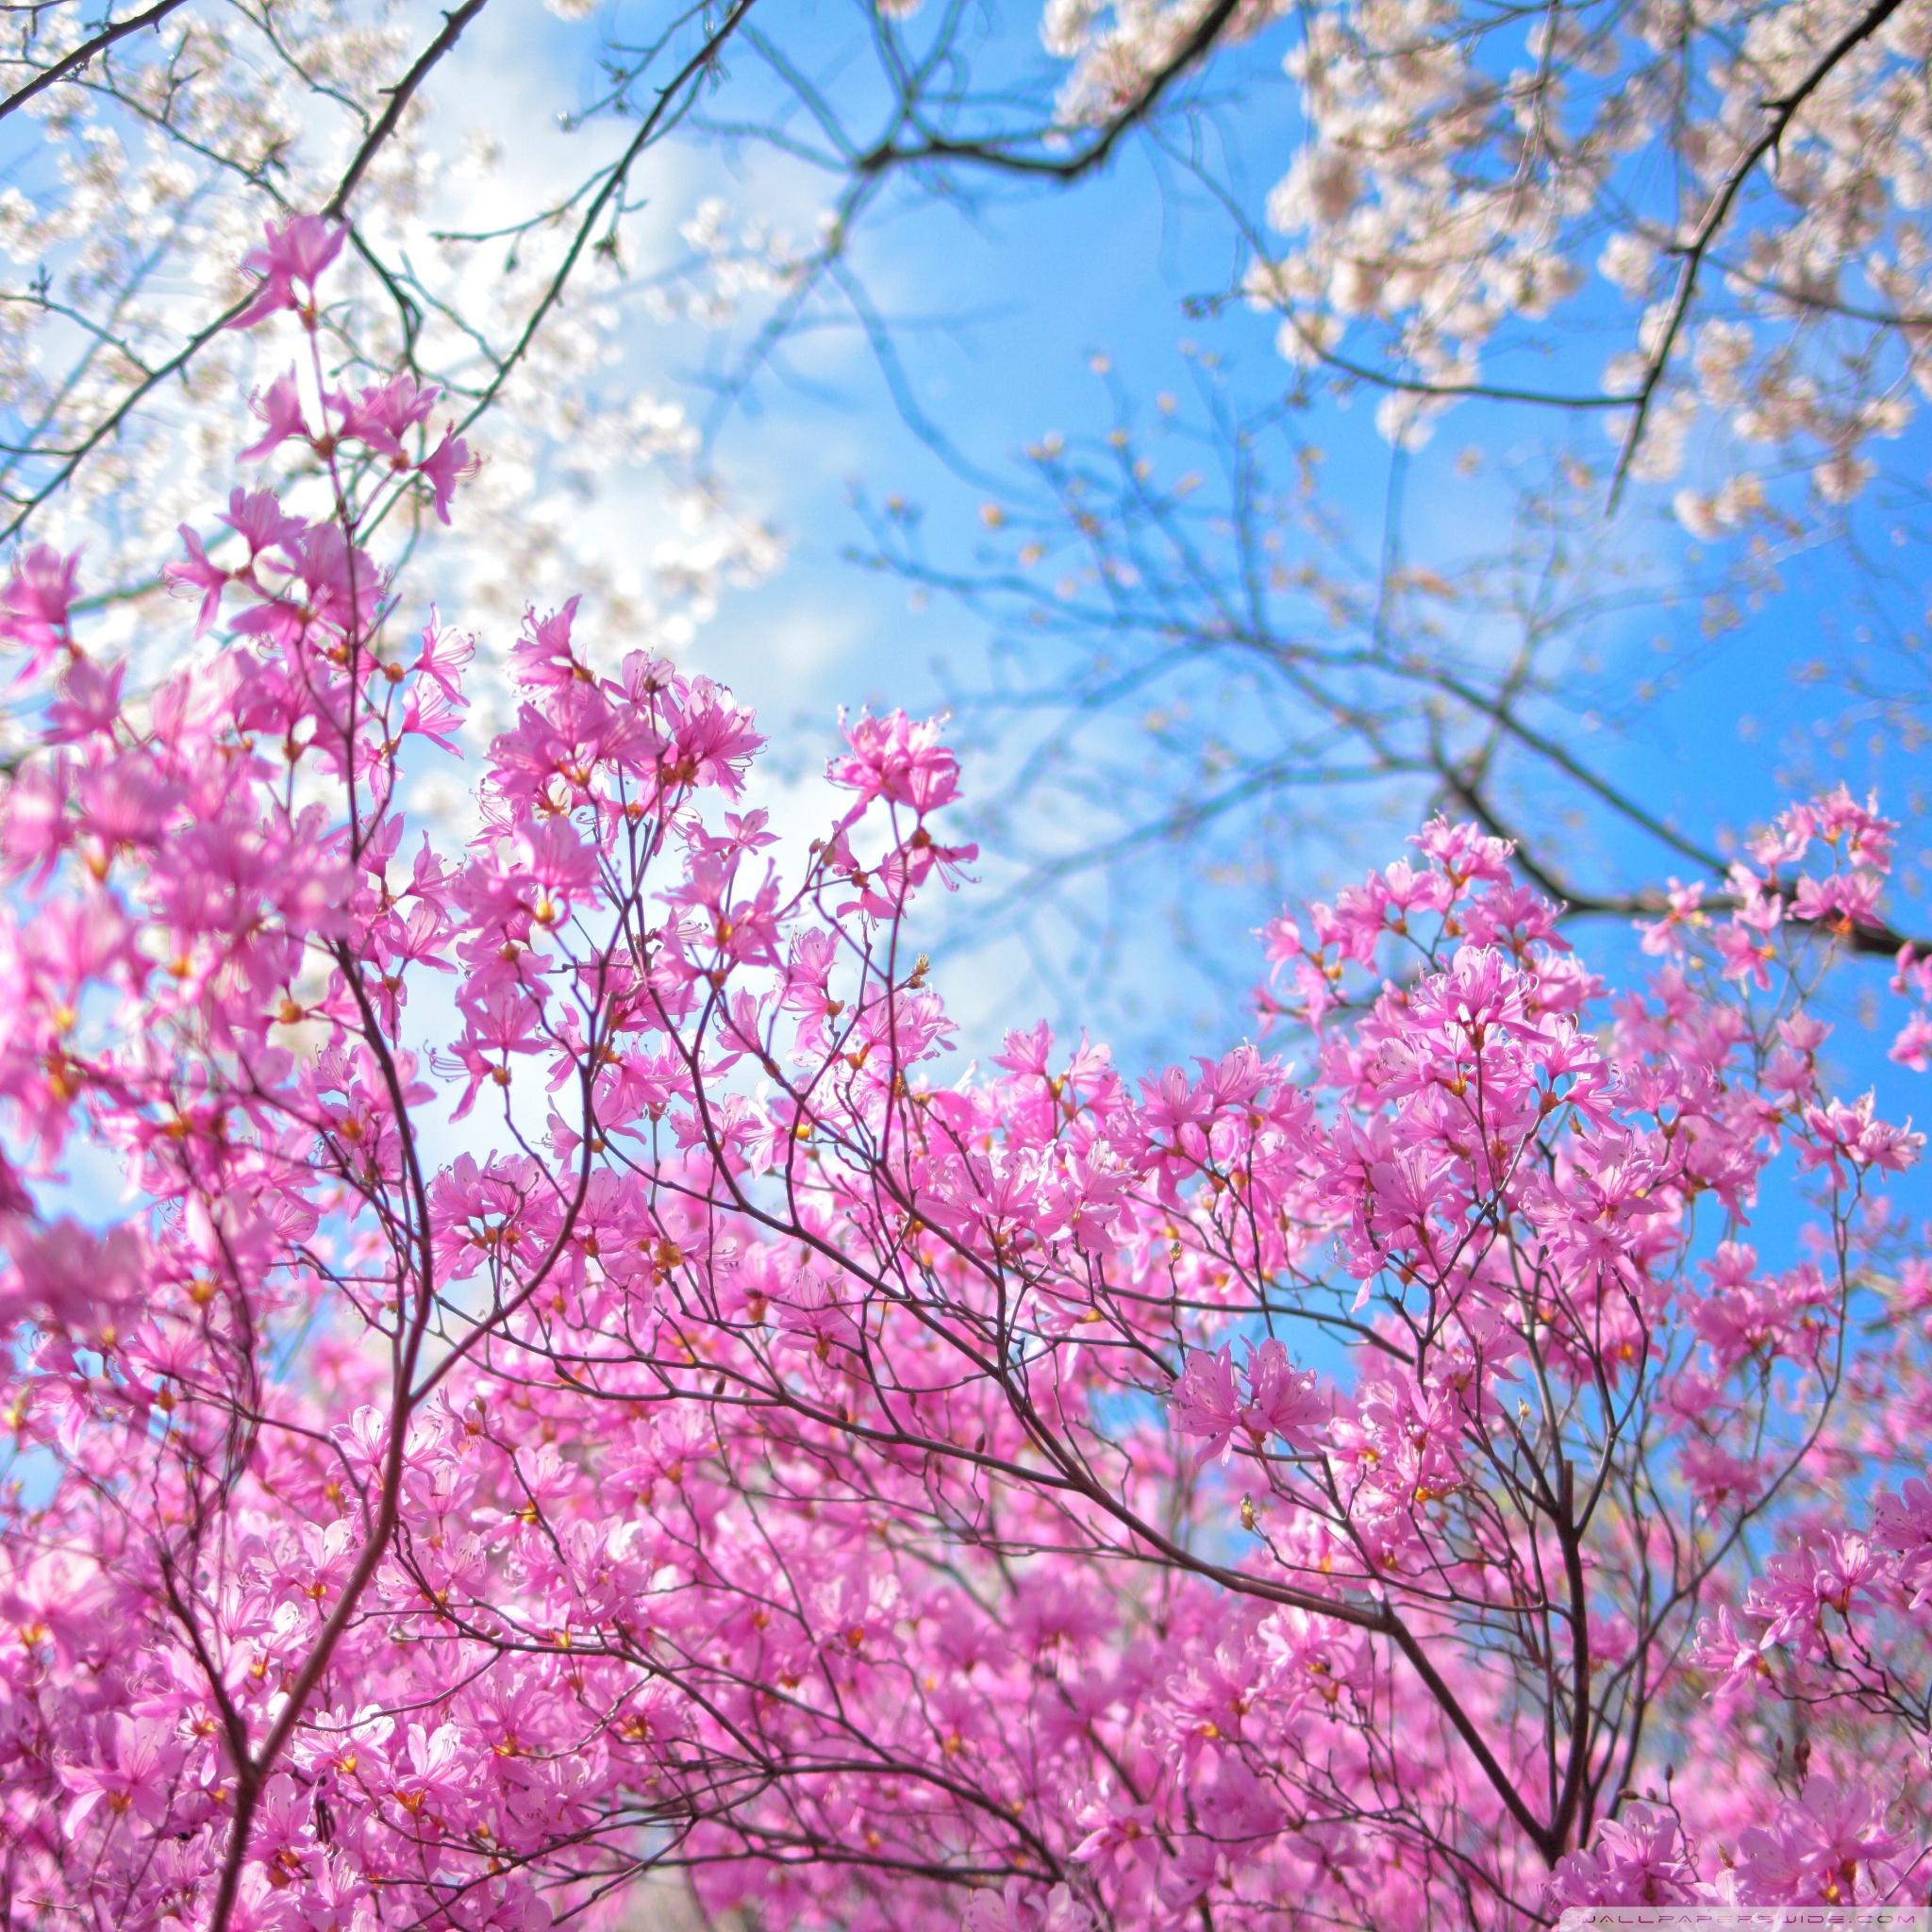 20 Excellent spring wallpaper for ipad You Can Use It Free Of Charge ...